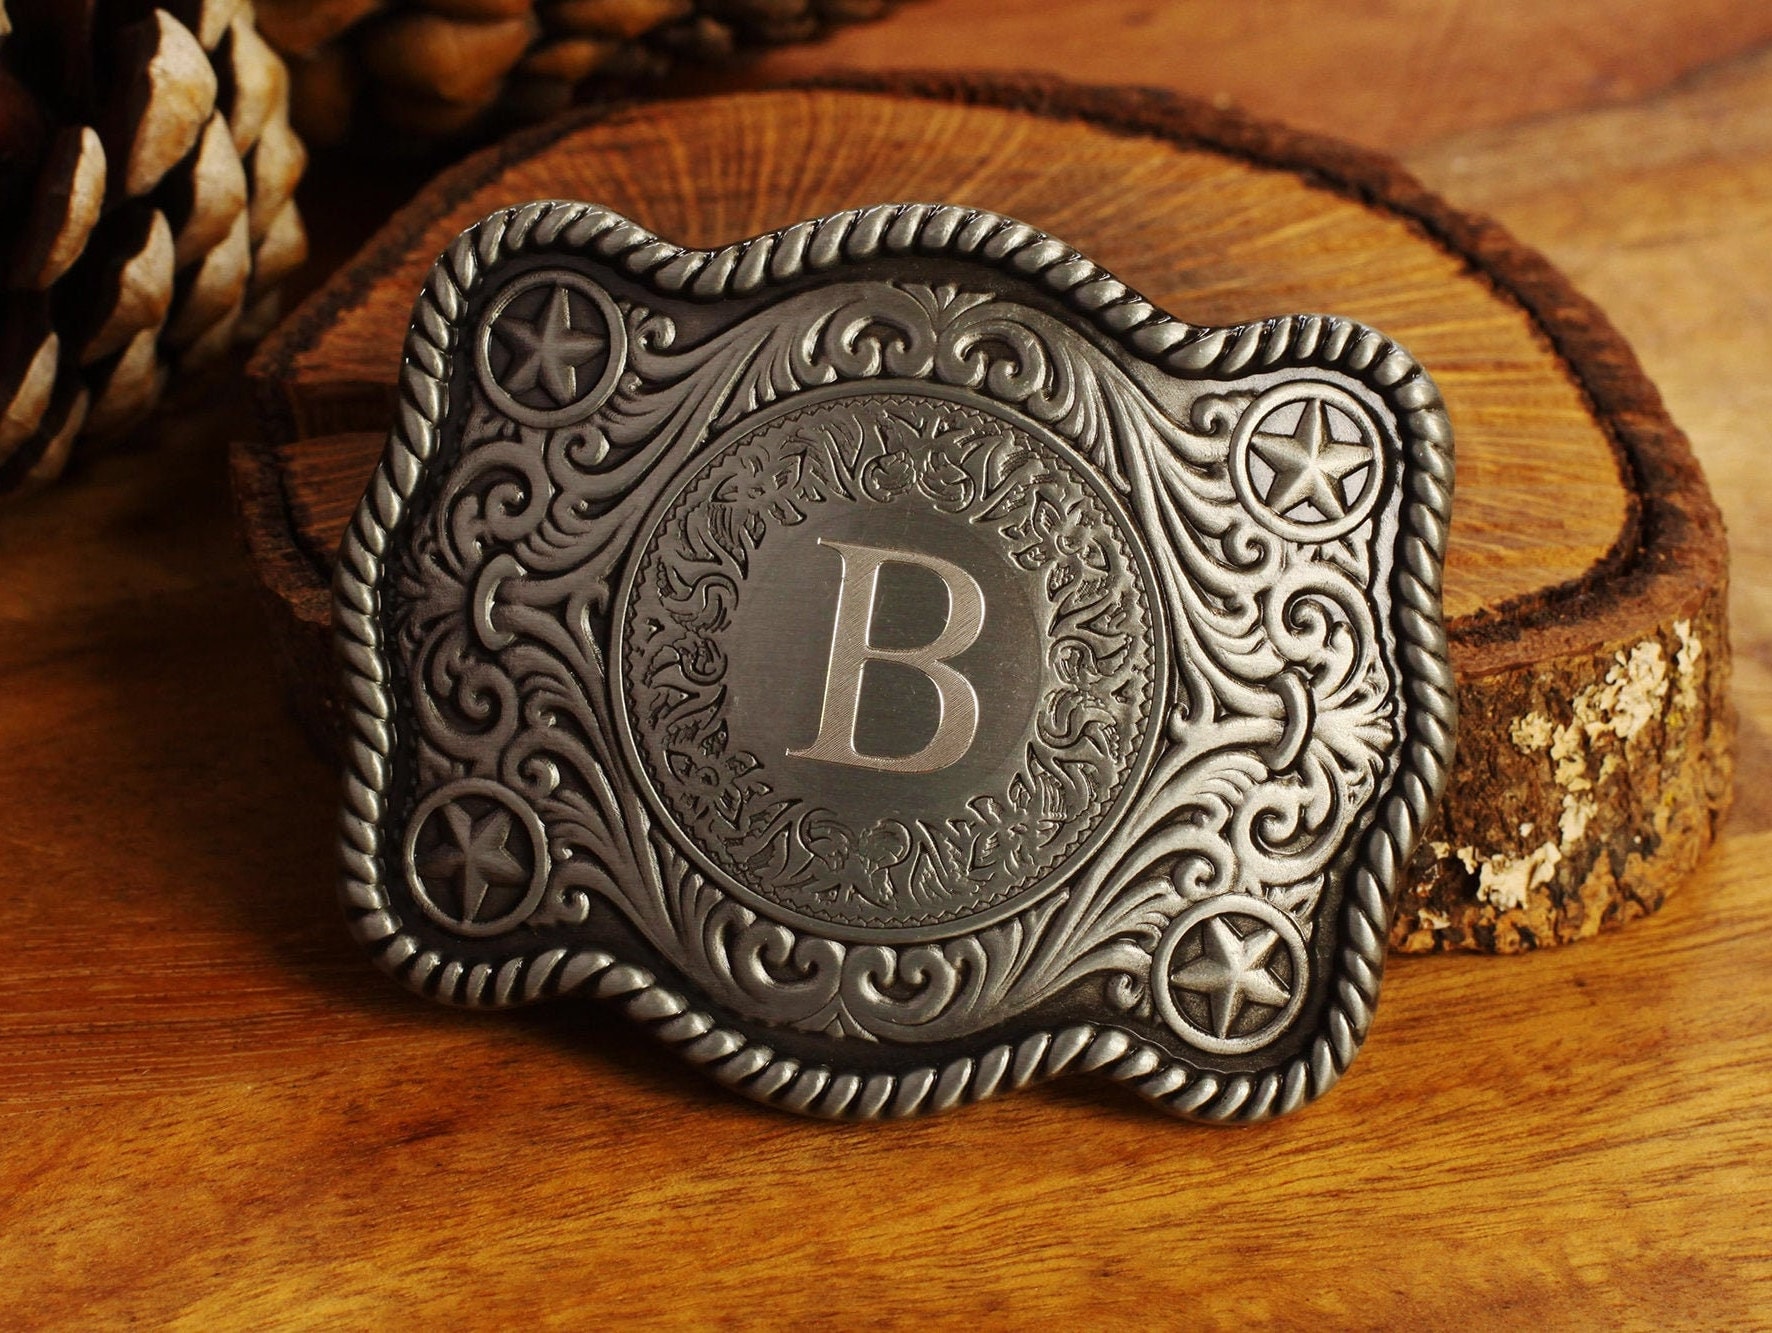 Engraved Solid Steel Belt Buckle - Personalized Satin Silver Belt Buckle -  Groomsman Belt Buckle - Cowboy Belt Buckle - Belt Buckle For Him